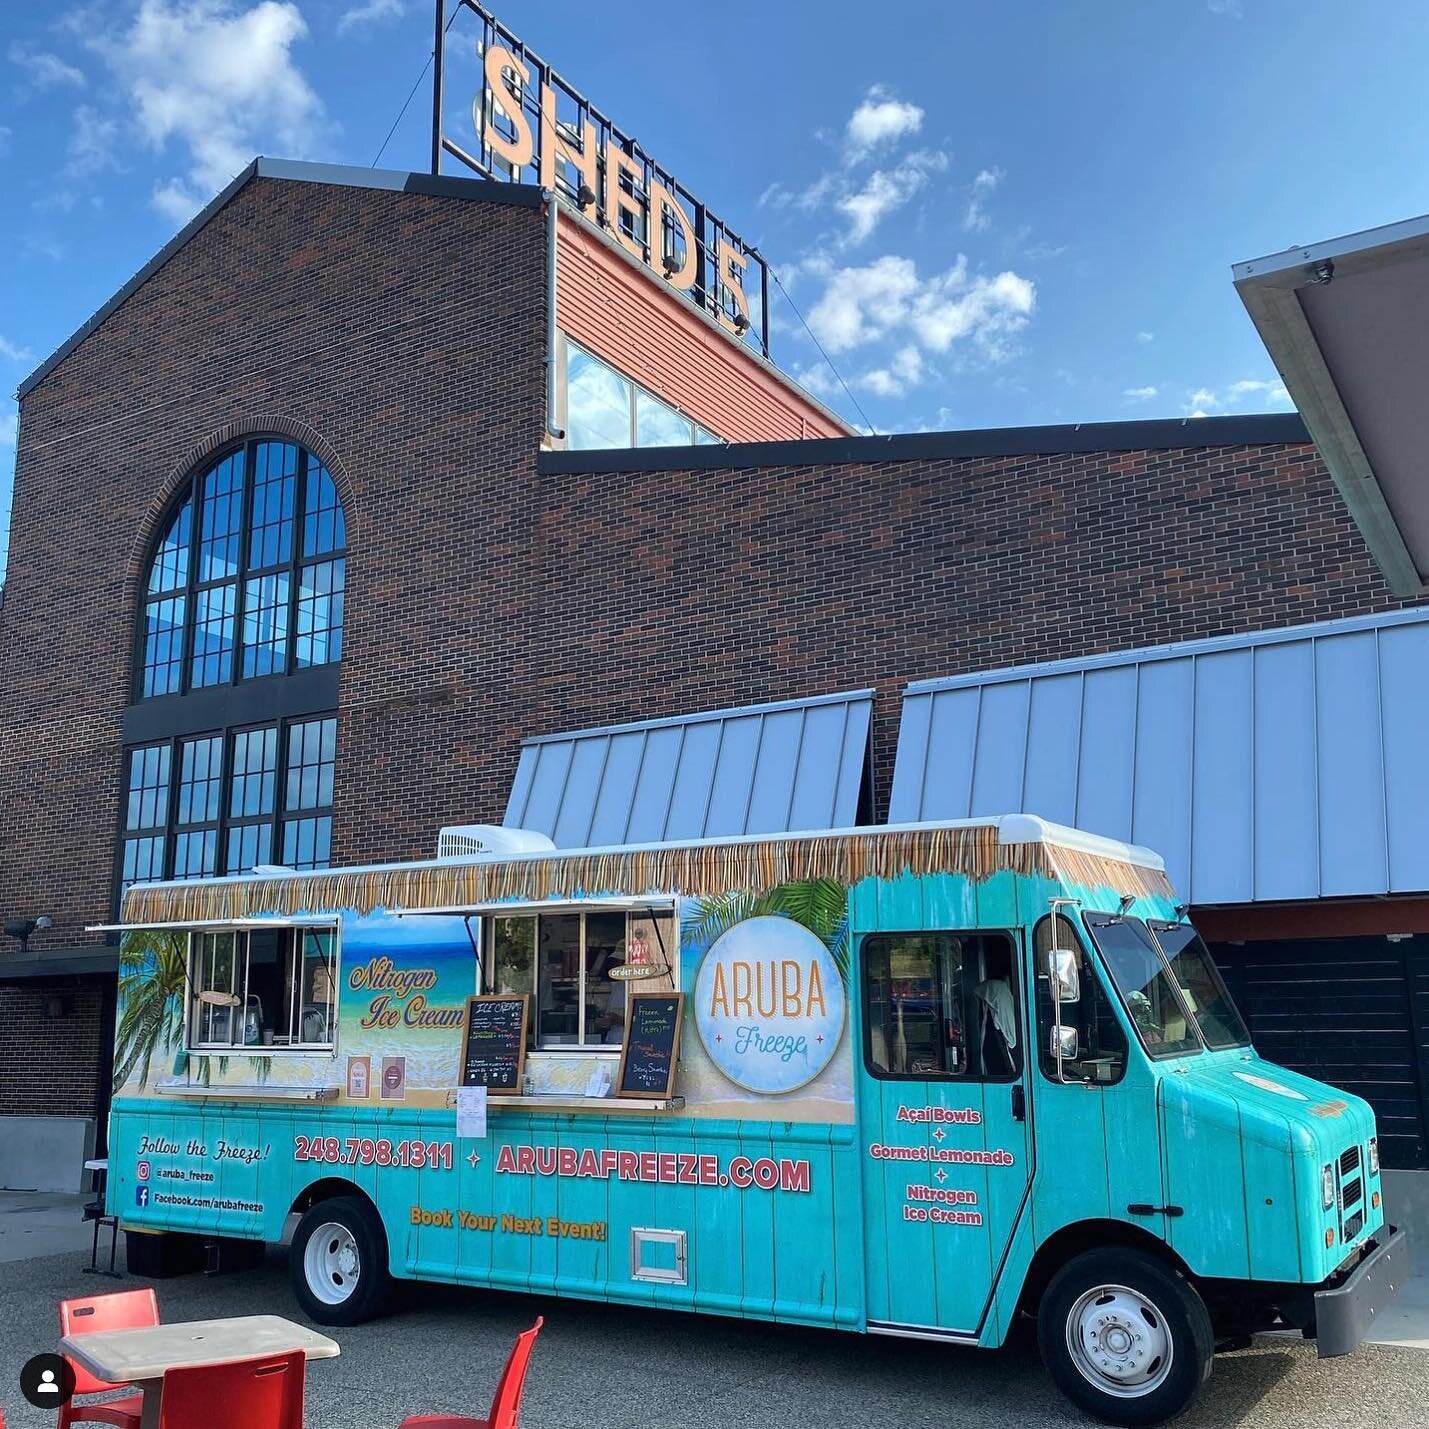 Truck season is officially upon us!!! THIS SATURDAY we will be @easternmarket serving up all the nitro goodness!! ⁣What flavor are you going to get?! Let us know below 👇🏼⁣
⁣⁣
𝐓𝐇𝐄 𝐋𝐈𝐍𝐄𝐔𝐏⁣⁣
🍋 Nitro Lemonade⁣⁣
🧋 Milkshakes⁣⁣
🍓Smoothie⁣⁣
🧋